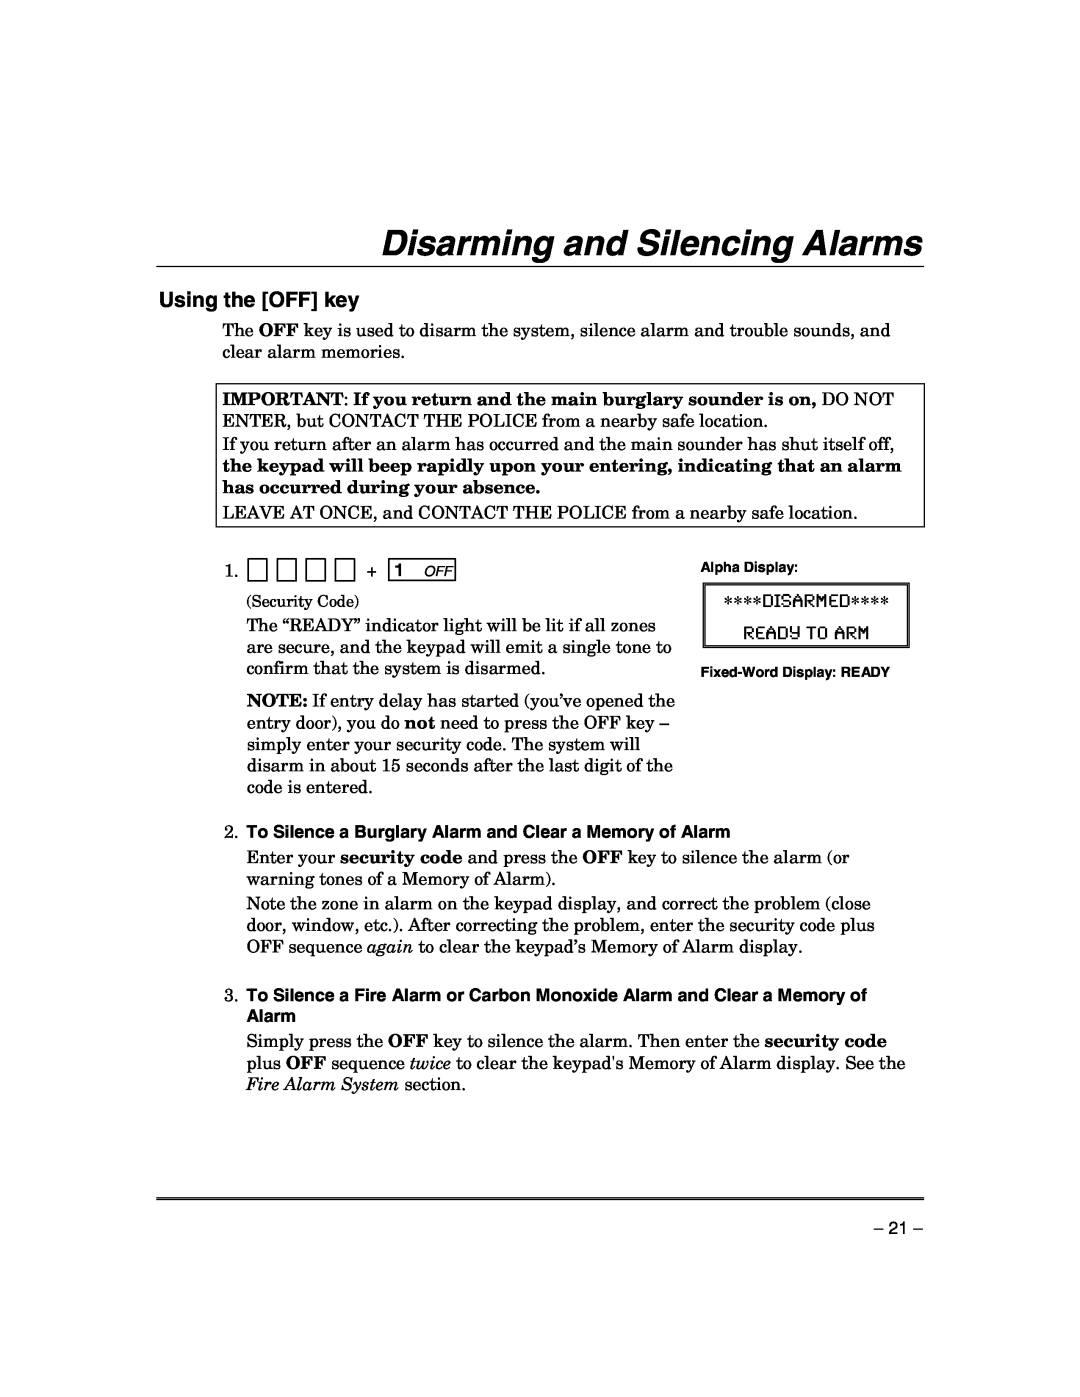 Honeywell VISTA-21IPSIA manual Disarming and Silencing Alarms, Using the OFF key, ∗∗∗∗Disarmed∗∗∗∗, Ready To Arm 